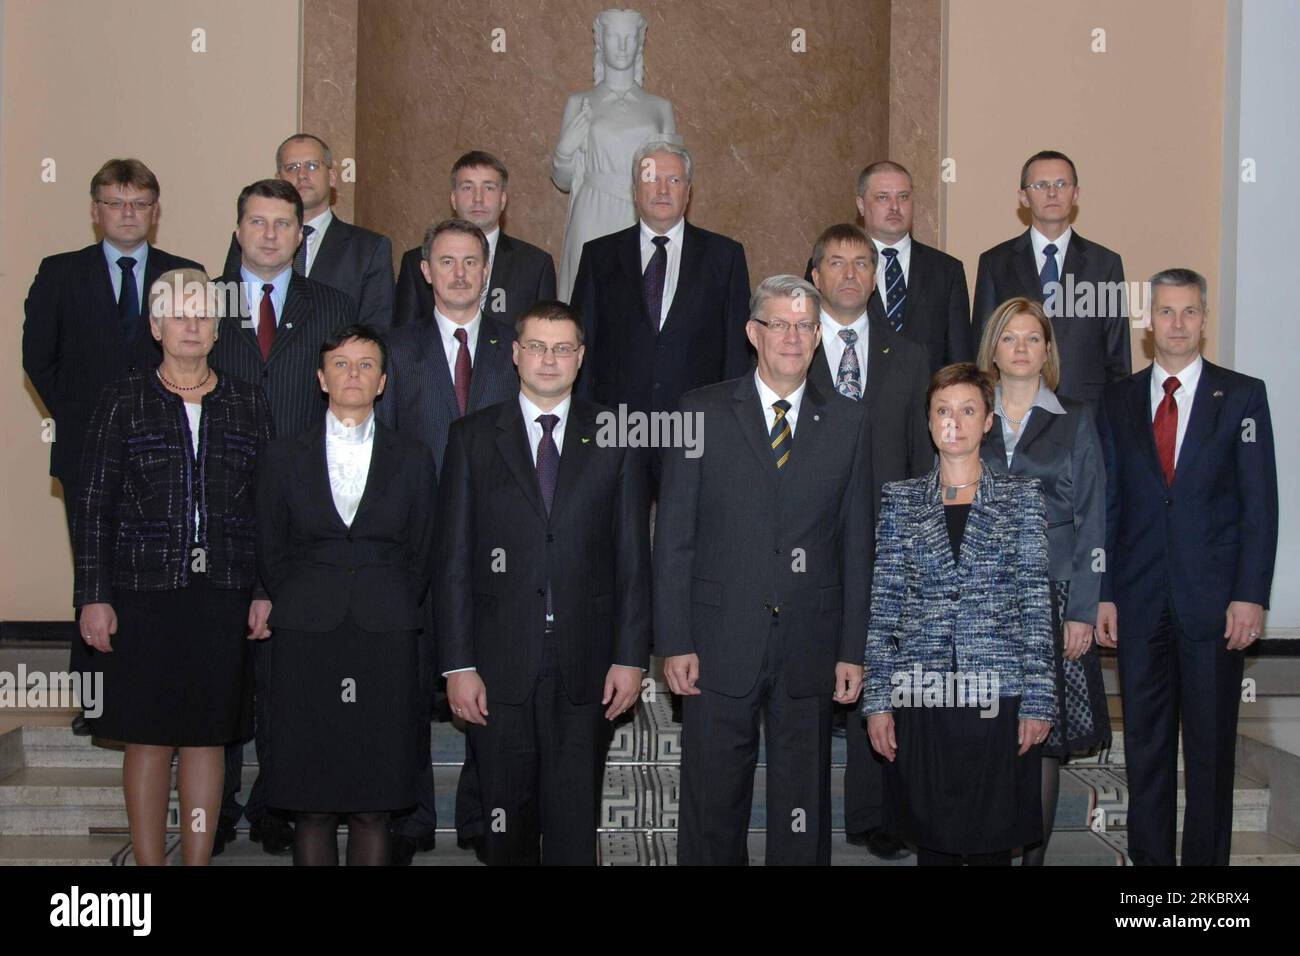 Bildnummer: 54602301  Datum: 03.11.2010  Copyright: imago/Xinhua (101103) -- RIGA, Nov. 3, 2010 (Xinhua) -- Latvian President Valdis Zatlers (2nd R Front) poses with Prime Minister Valdis Dombrovskis (2nd L Front) and new government ministers after the Parliament formally approved the new government in Riga, Latvia, Nov. 3, 2010. (Xinhua/Yang Dehong) (zw) LATVIA-RIGA-GOVERNMENT PUBLICATIONxNOTxINxCHN People Politik Regierung kbdig xsk 2010 quer Highlight  o0 Totale, Kabinett    Bildnummer 54602301 Date 03 11 2010 Copyright Imago XINHUA  Riga Nov 3 2010 XINHUA Latvian President Valdis Zatlers 2 Stock Photo